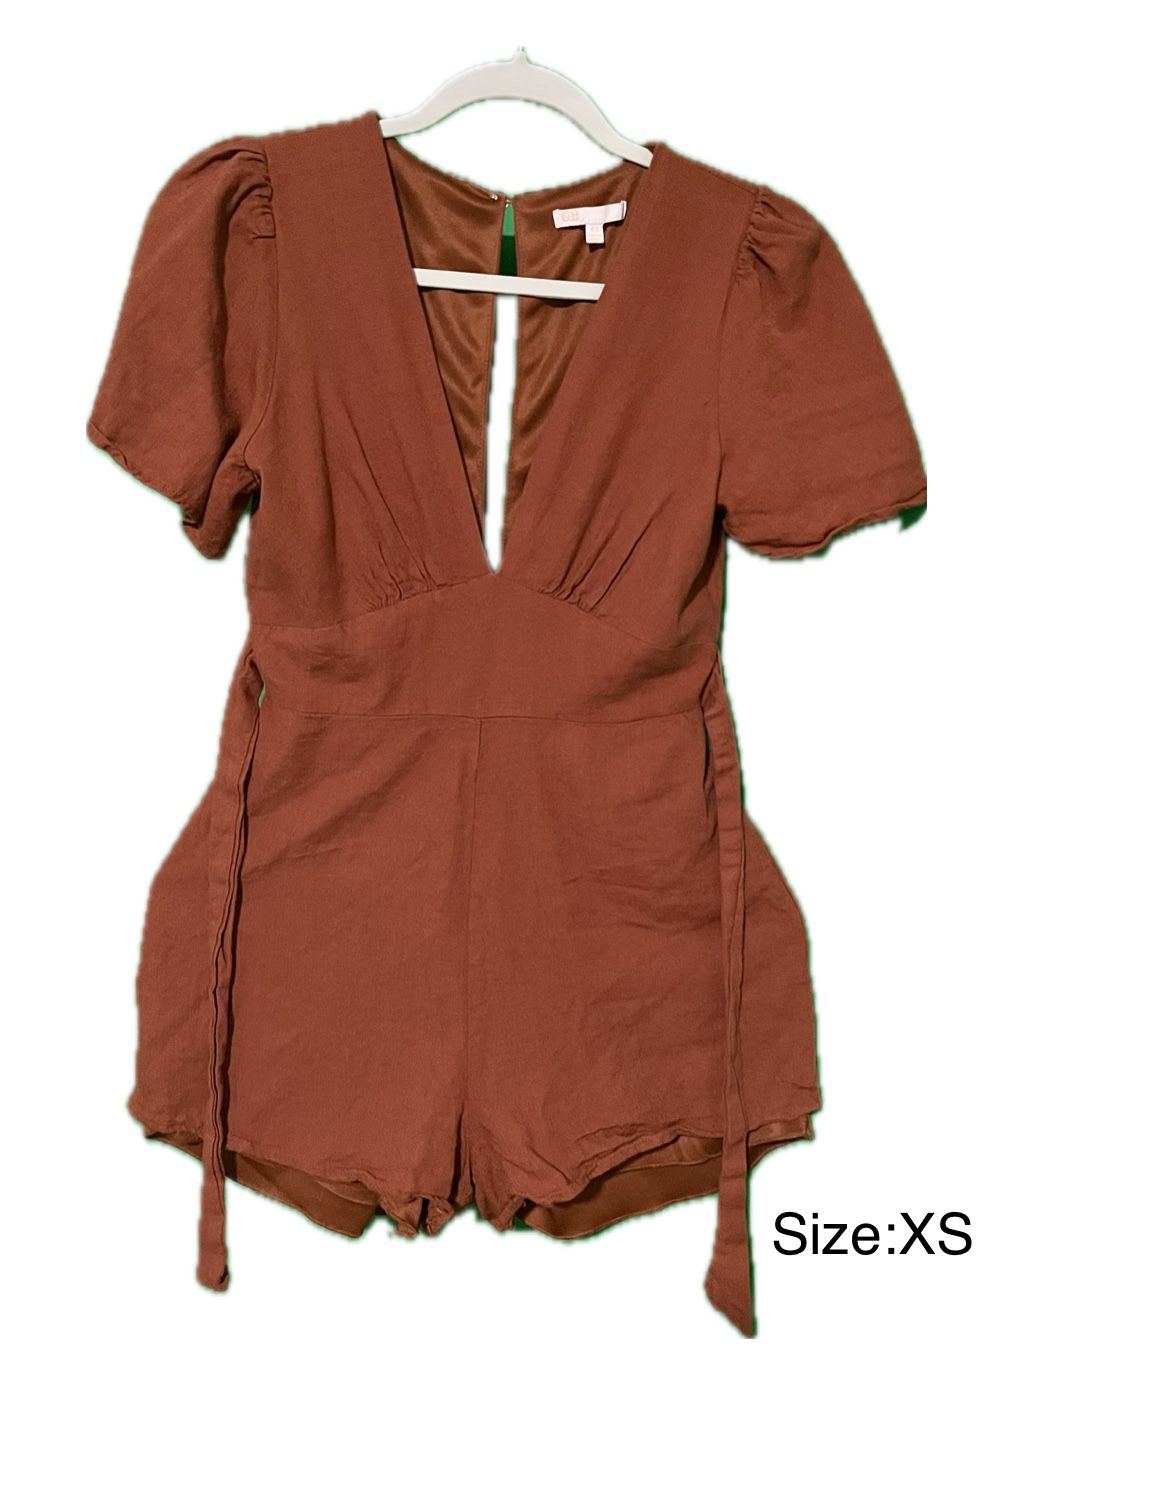 Brown Romper Extra-Small